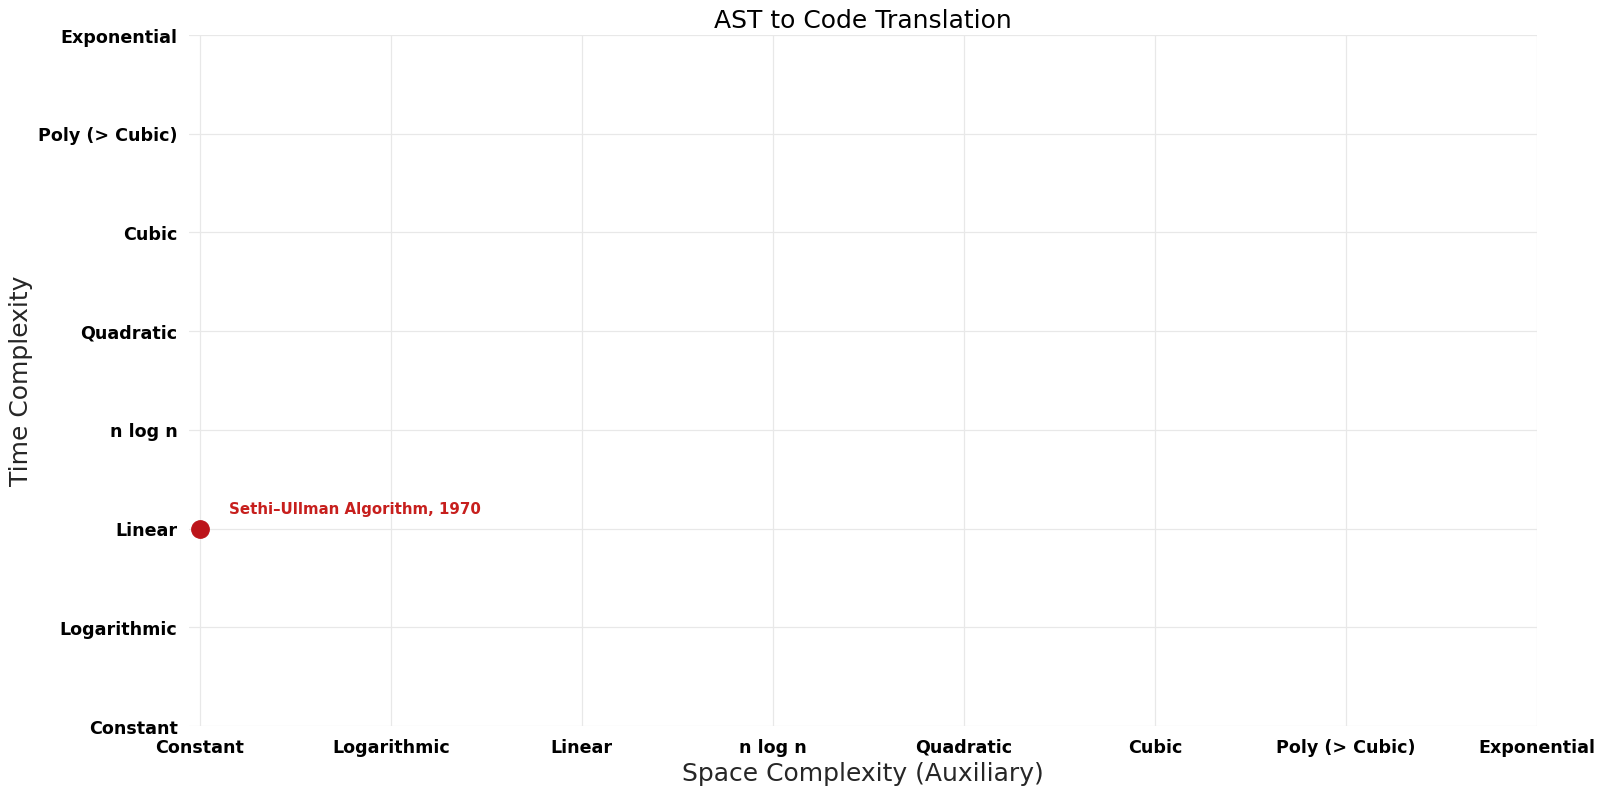 File:AST to Code Translation - Pareto Frontier.png